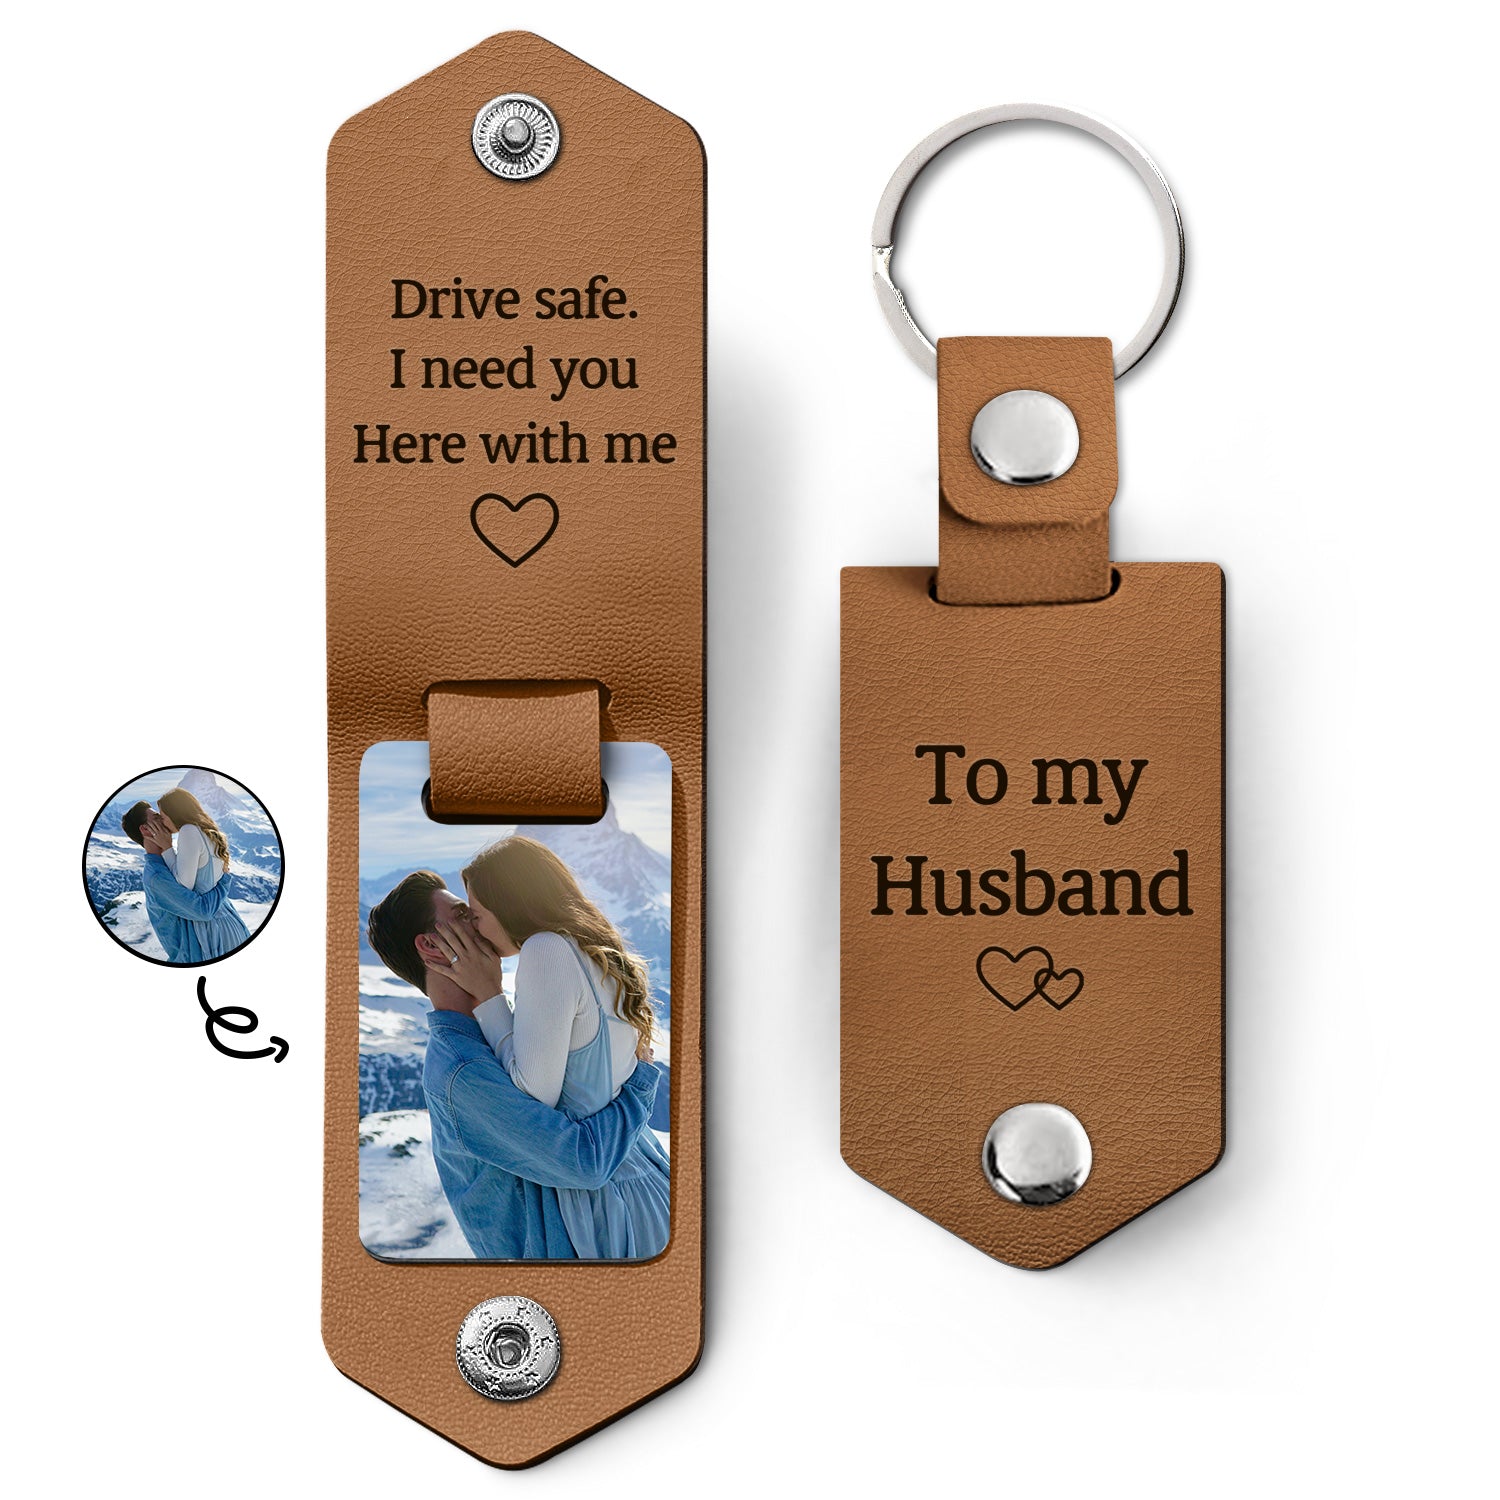 Custom Photo Drive Safe I Need You Here With Me - Gift For Boyfriends, Husbands, Couples - Personalized Leather Photo Keychain